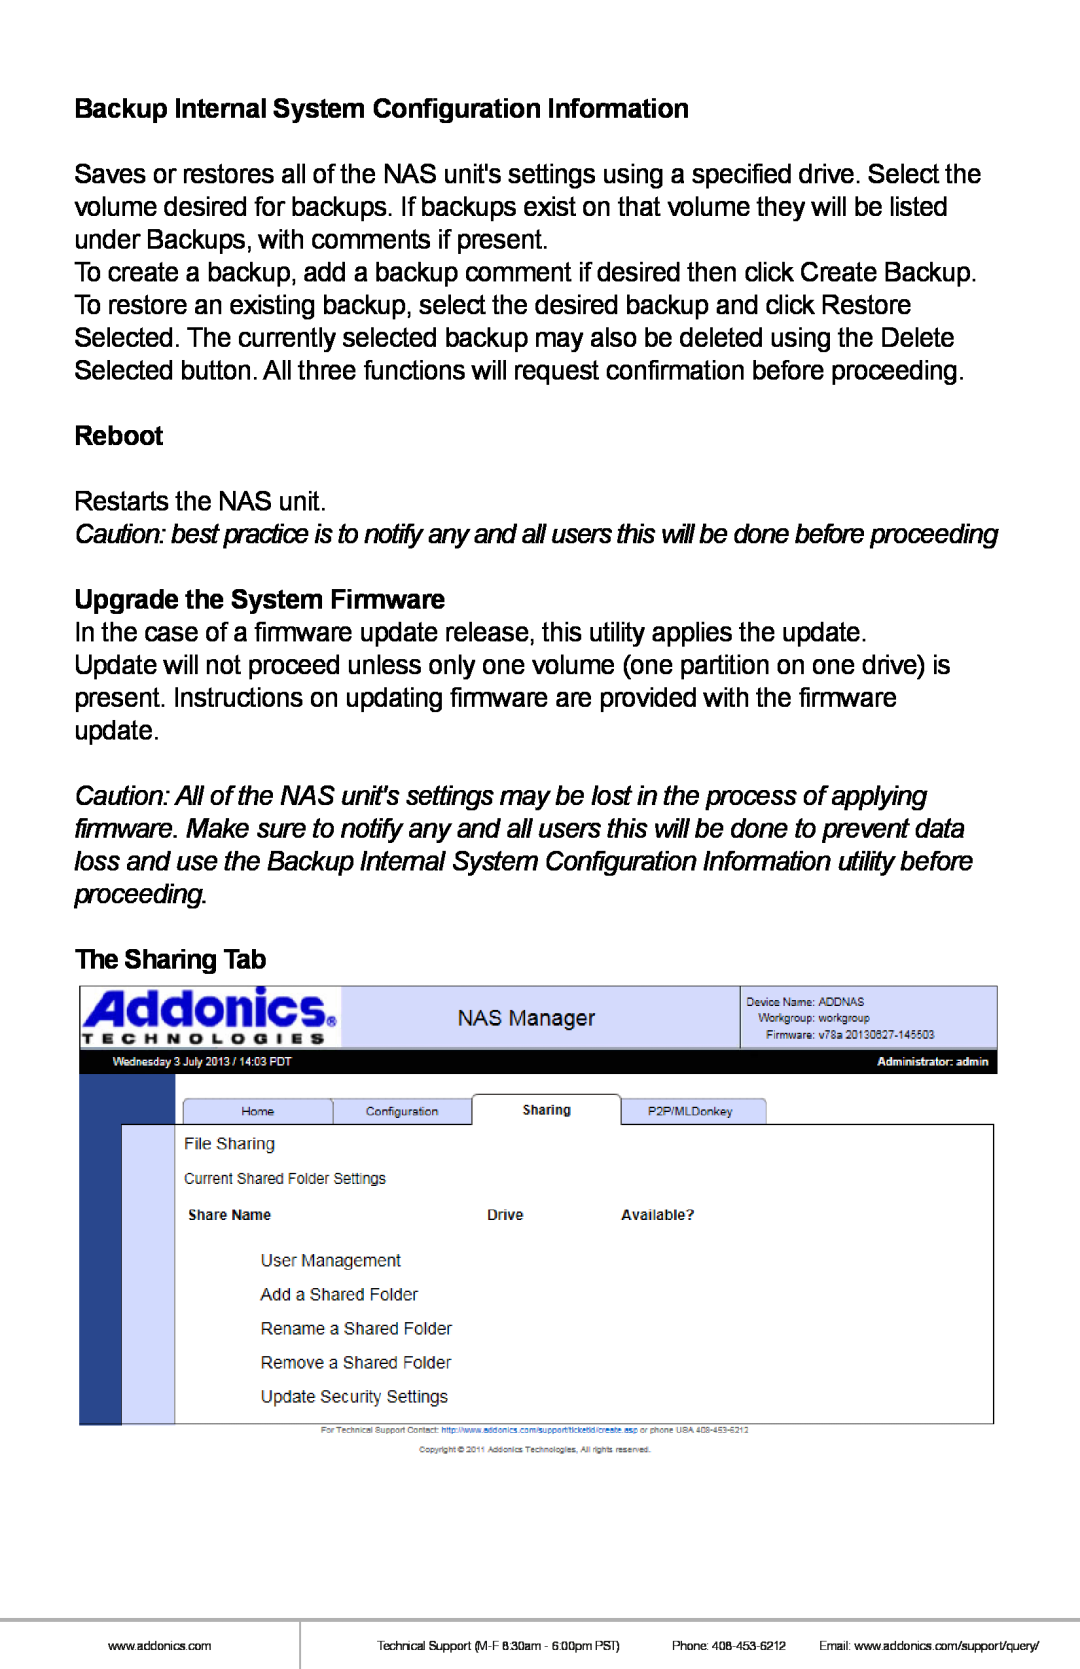 Addonics Technologies NAS4RM manual Backup Internal System Configuration Information, Reboot, Upgrade the System Firmware 